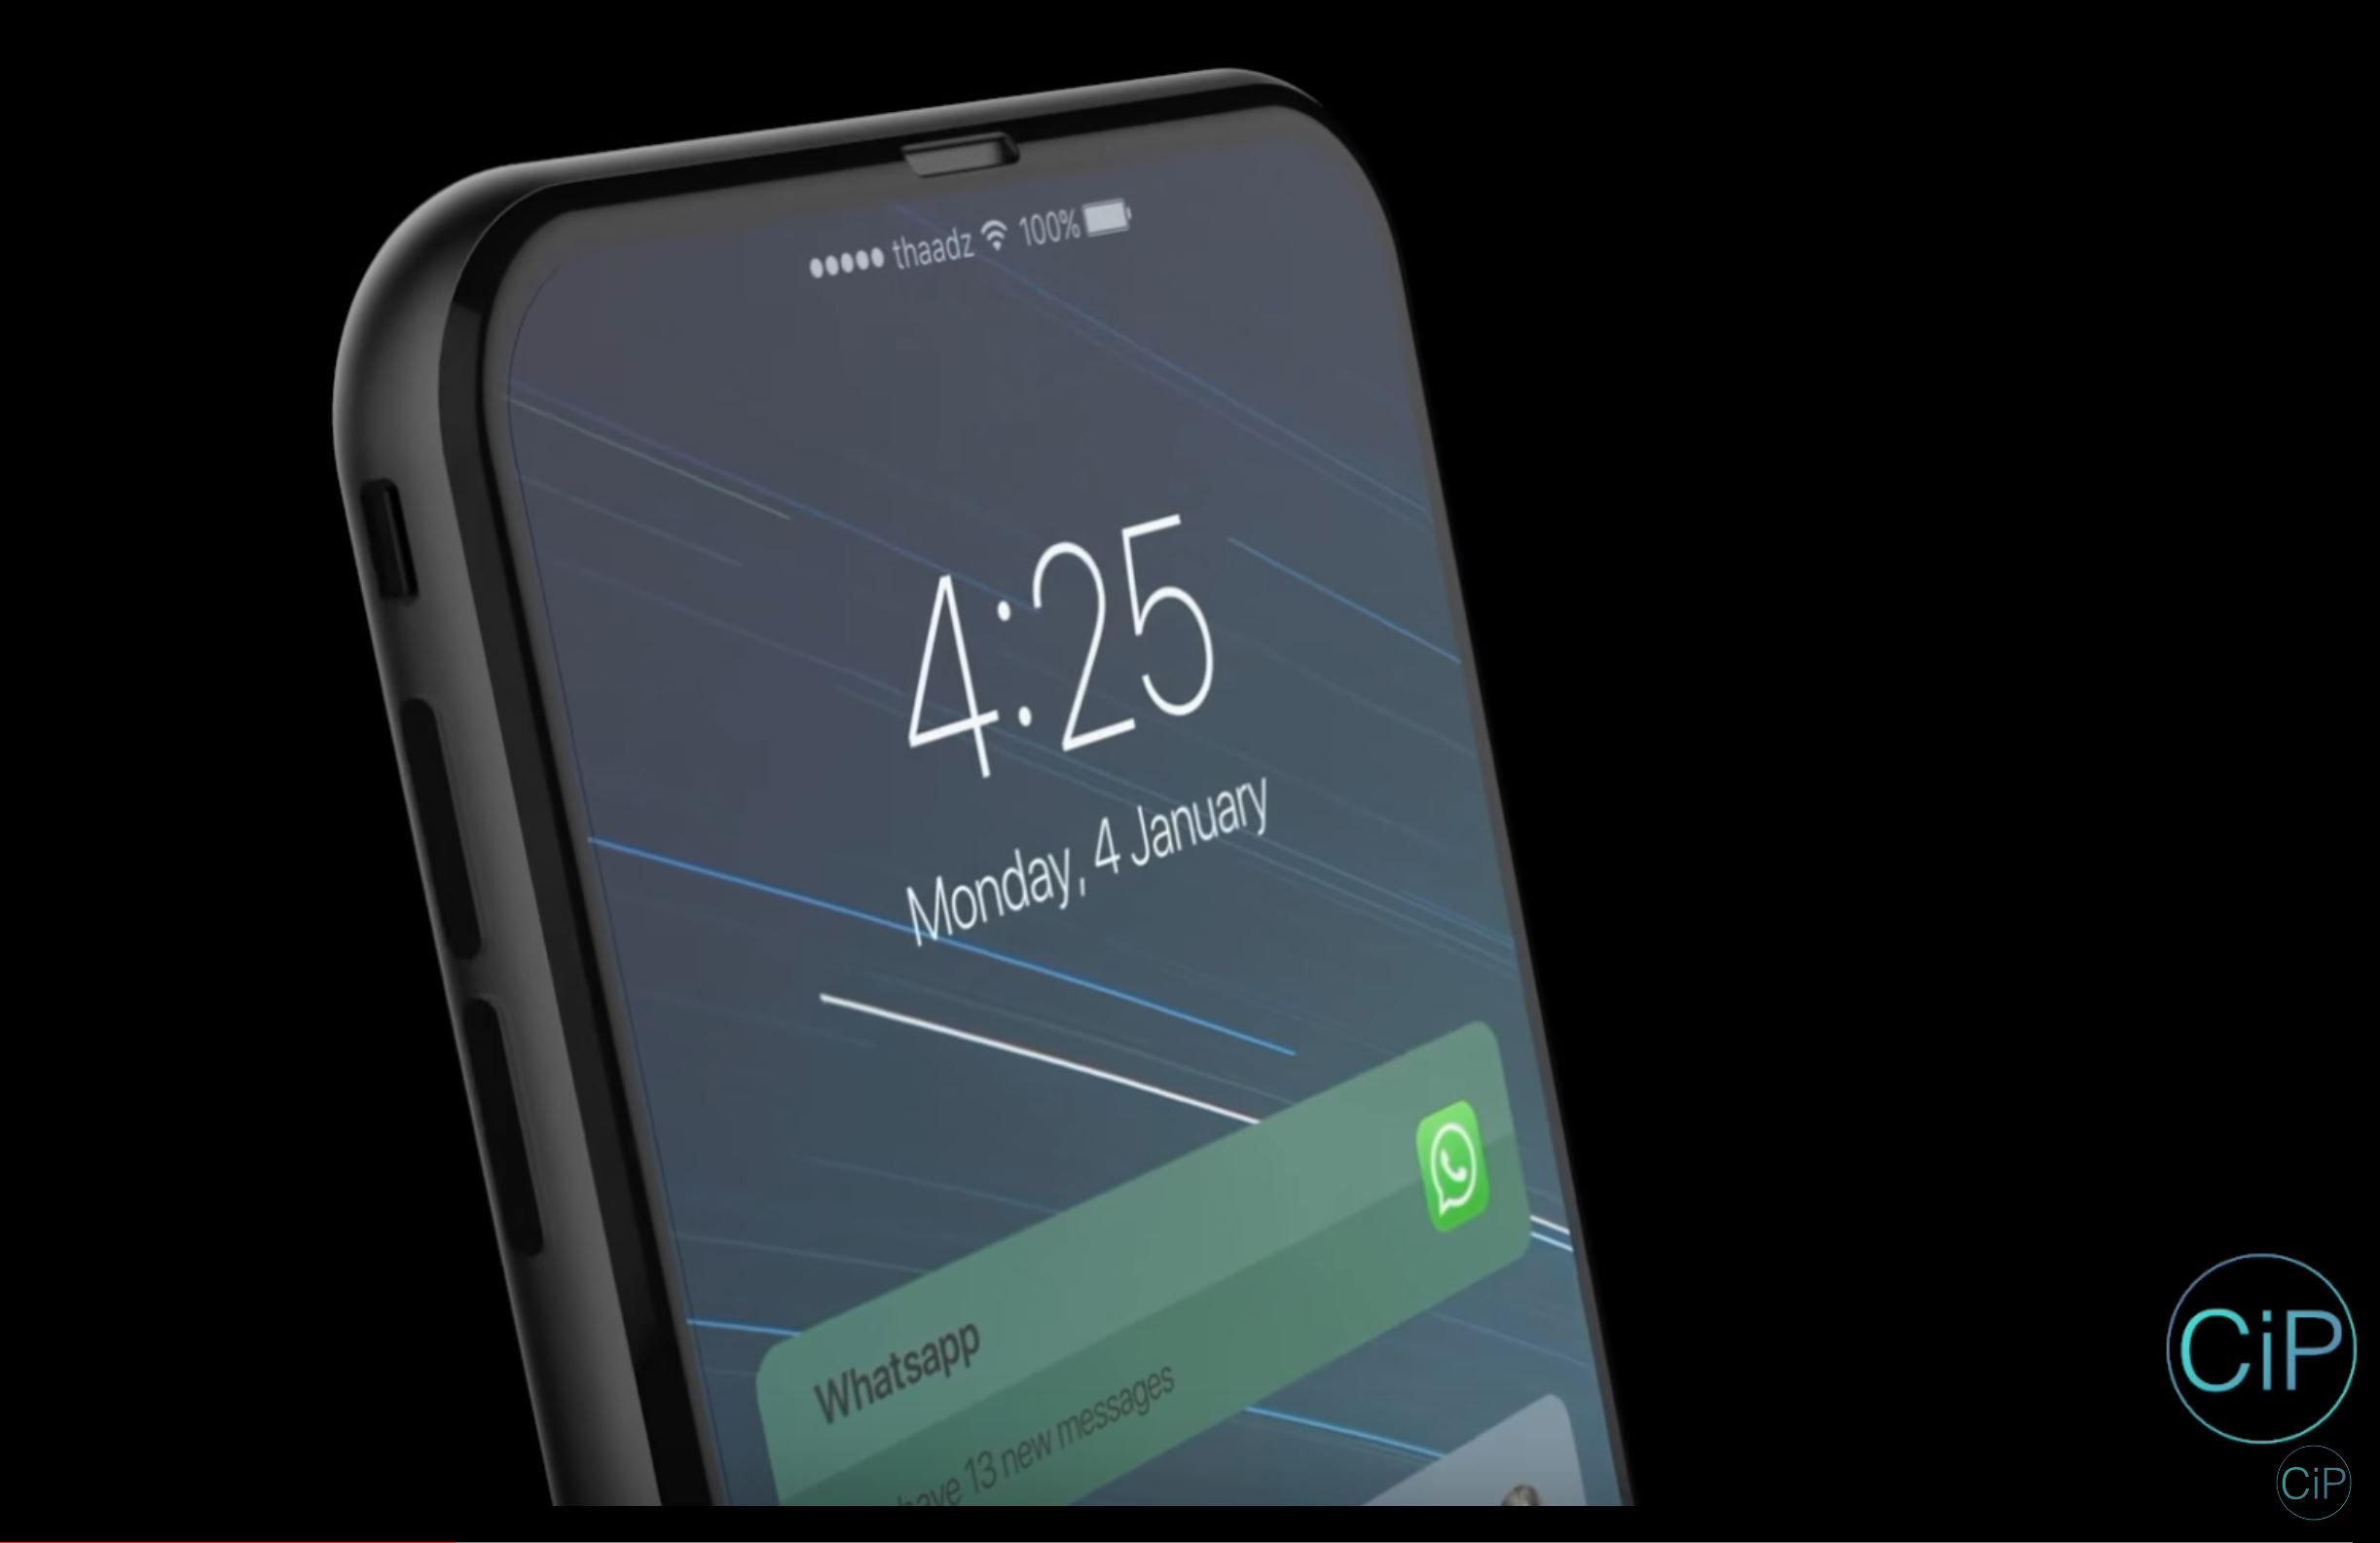 Apple's Top New Phone to Be Called ‘iPhone X,’ Code Leaks Show